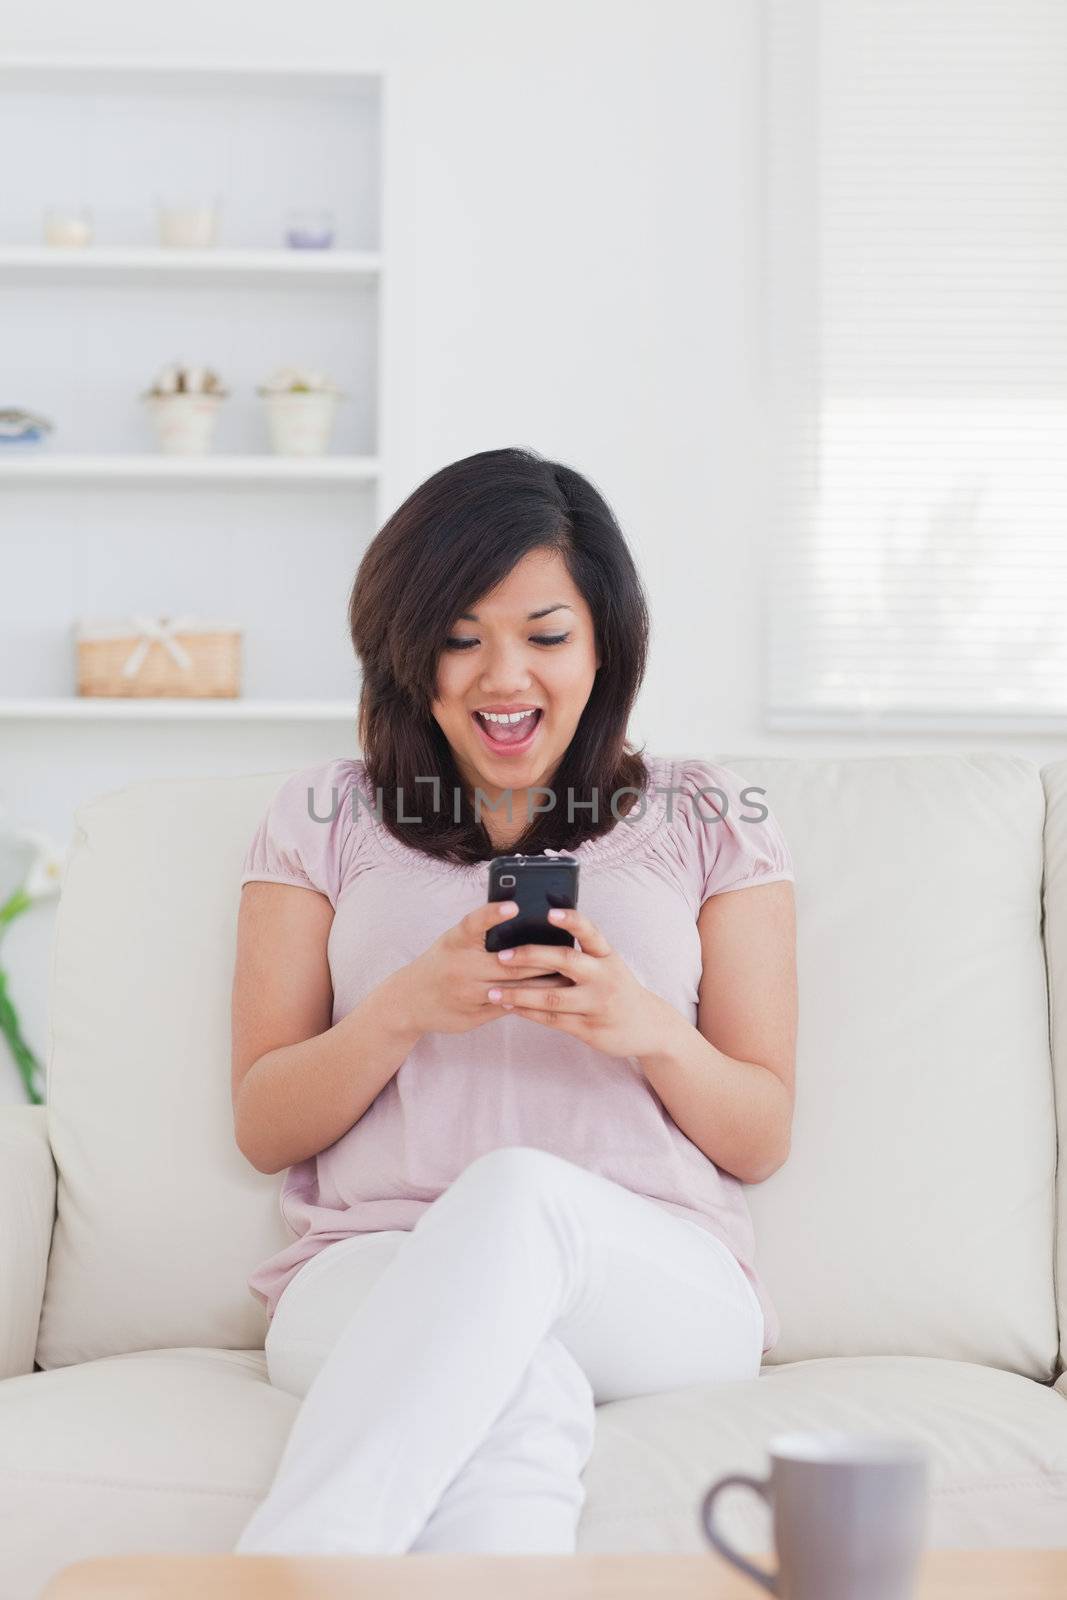 Woman surprised while looking at a phone in a living room